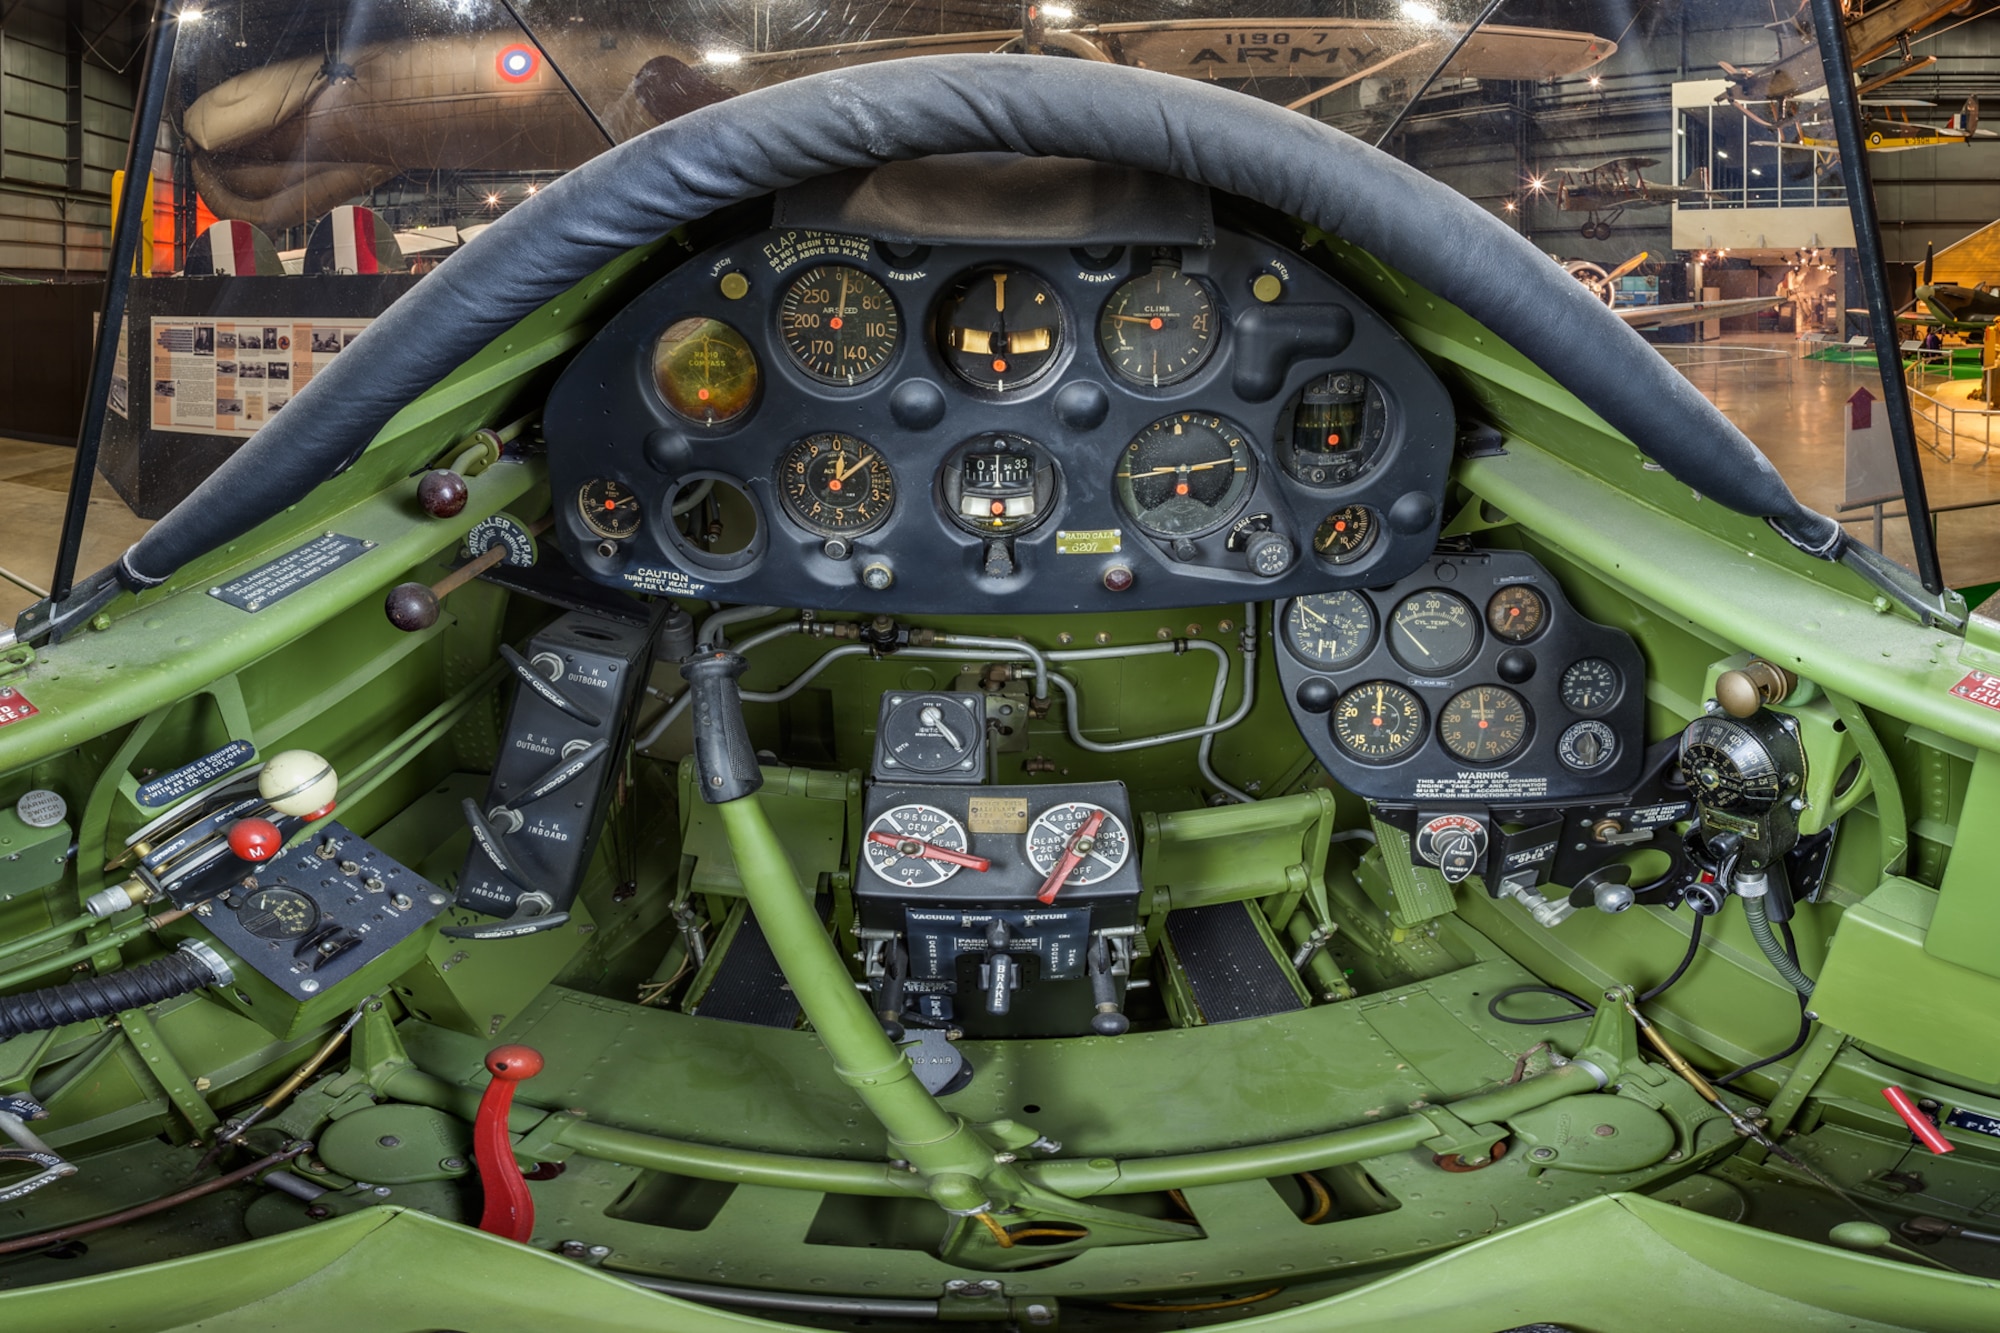 DAYTON, Ohio -- Northrop A-17A cockpit view in the Early Years Gallery at the National Museum of the United States Air Force.(Photo courtesy of Lyle Jansma, Aerocapture Images) 